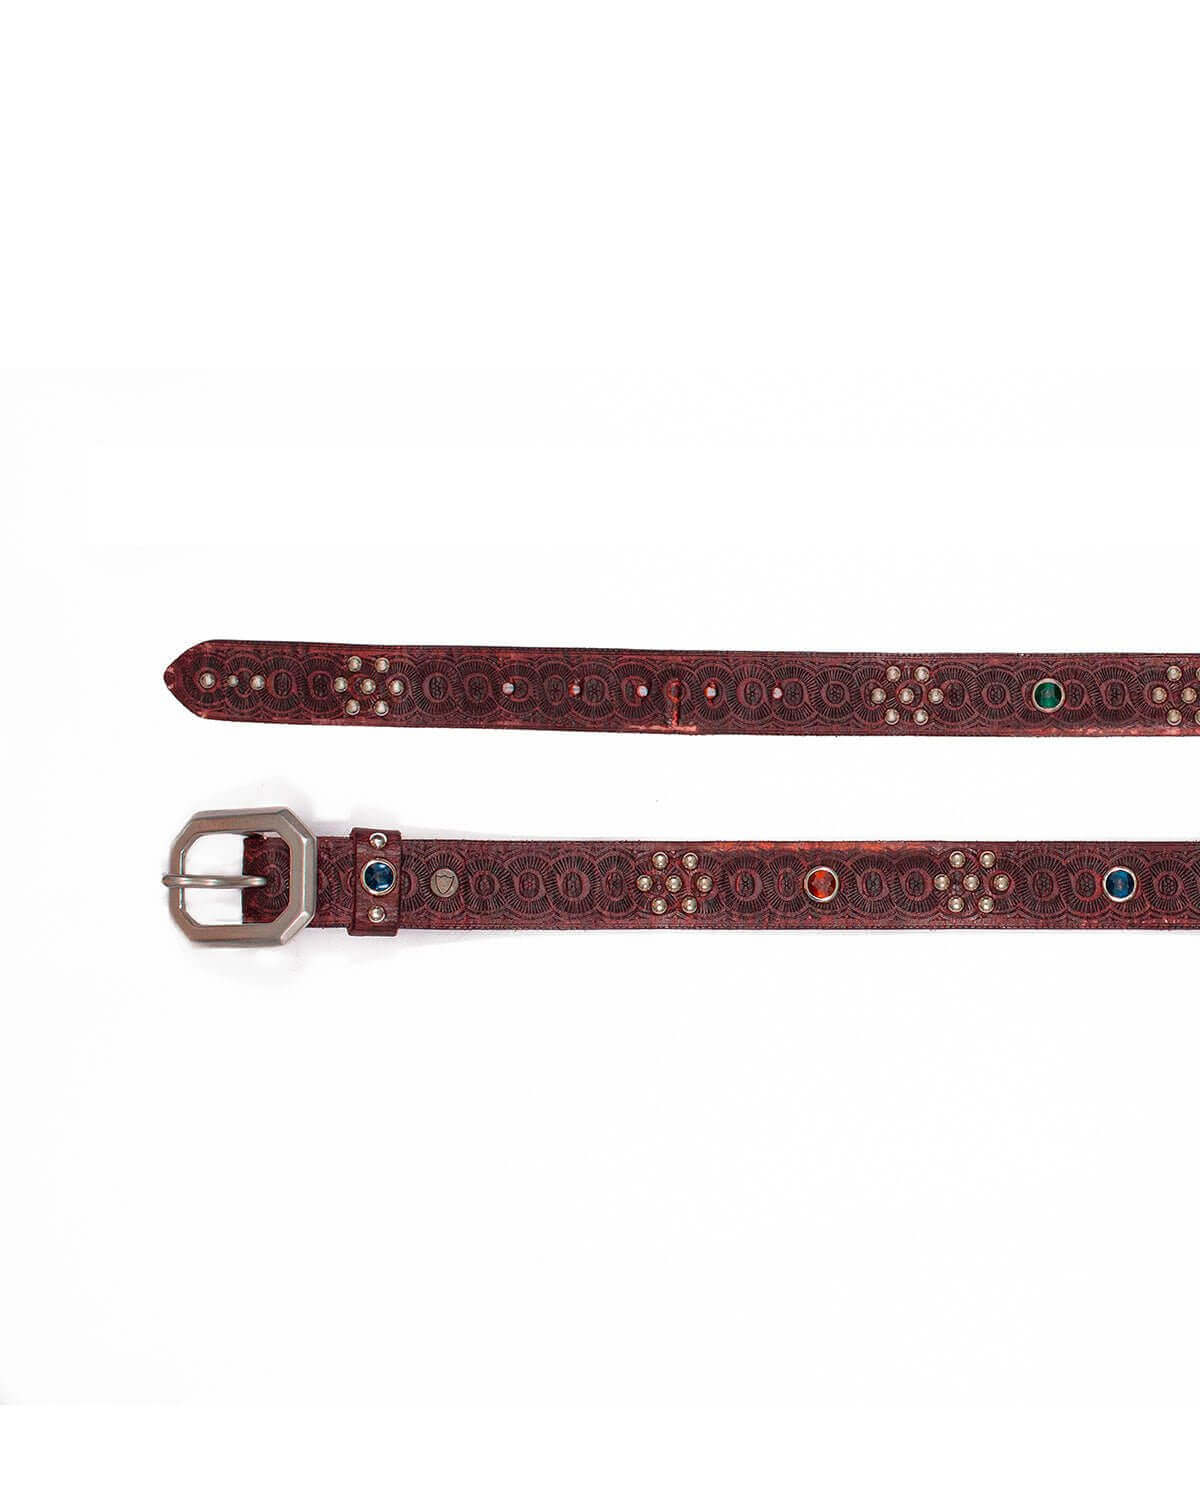 CATALINA BELT Brown leather belt with studs and rhinestones. Carved buckle. Height: 3,5 cm. Made in Italy. HTC LOS ANGELES